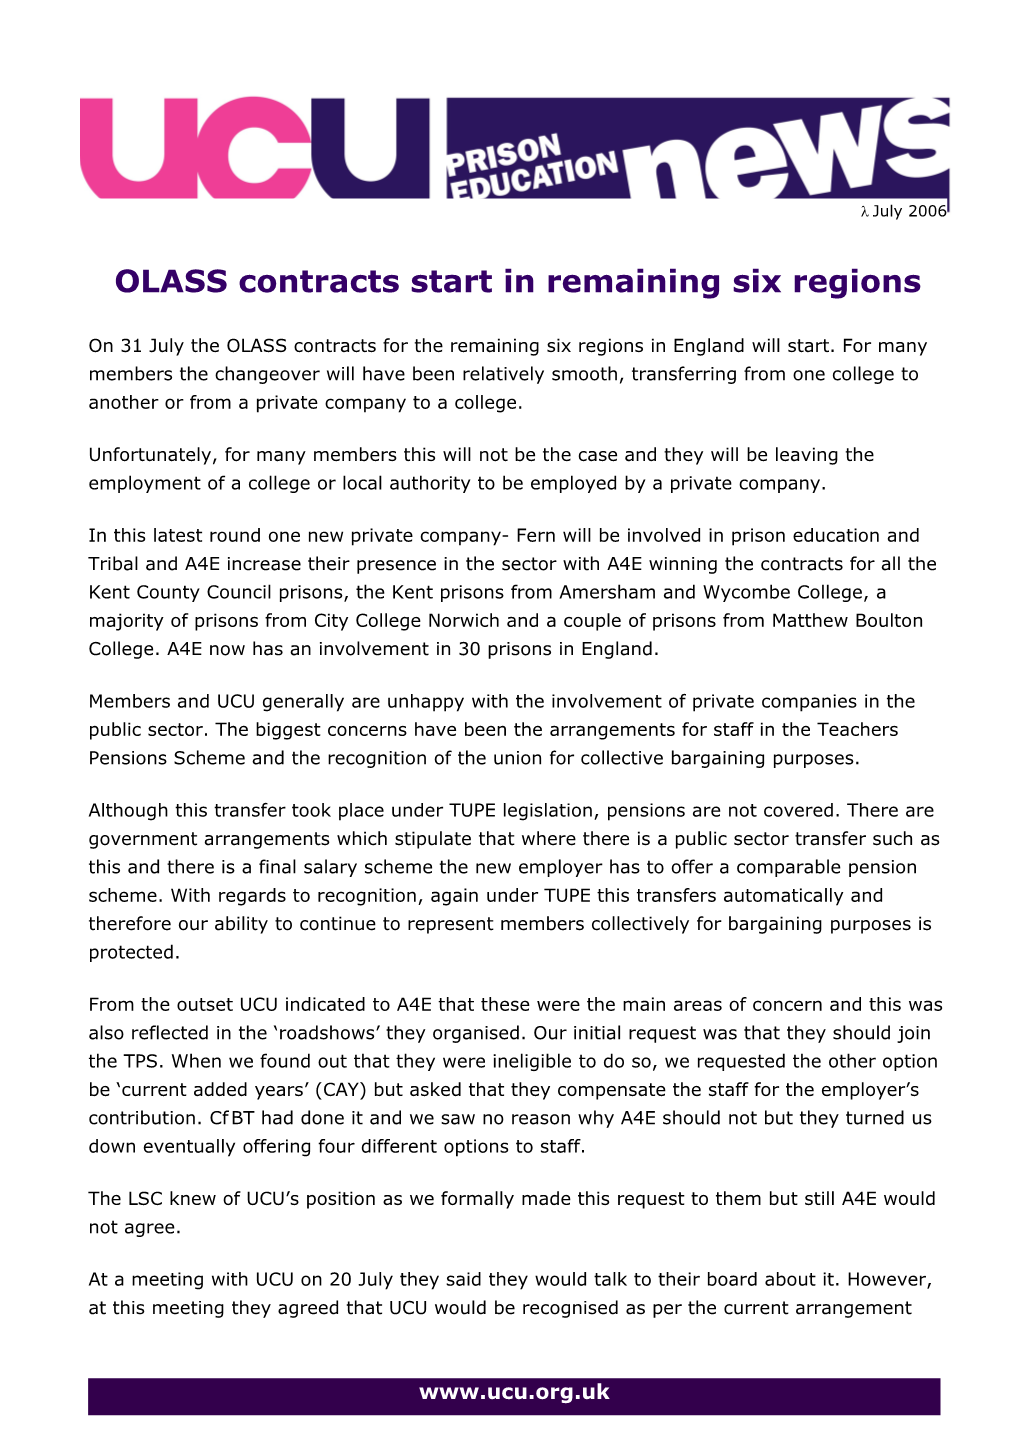 OLASS Contracts Start in Remaining Six Regions